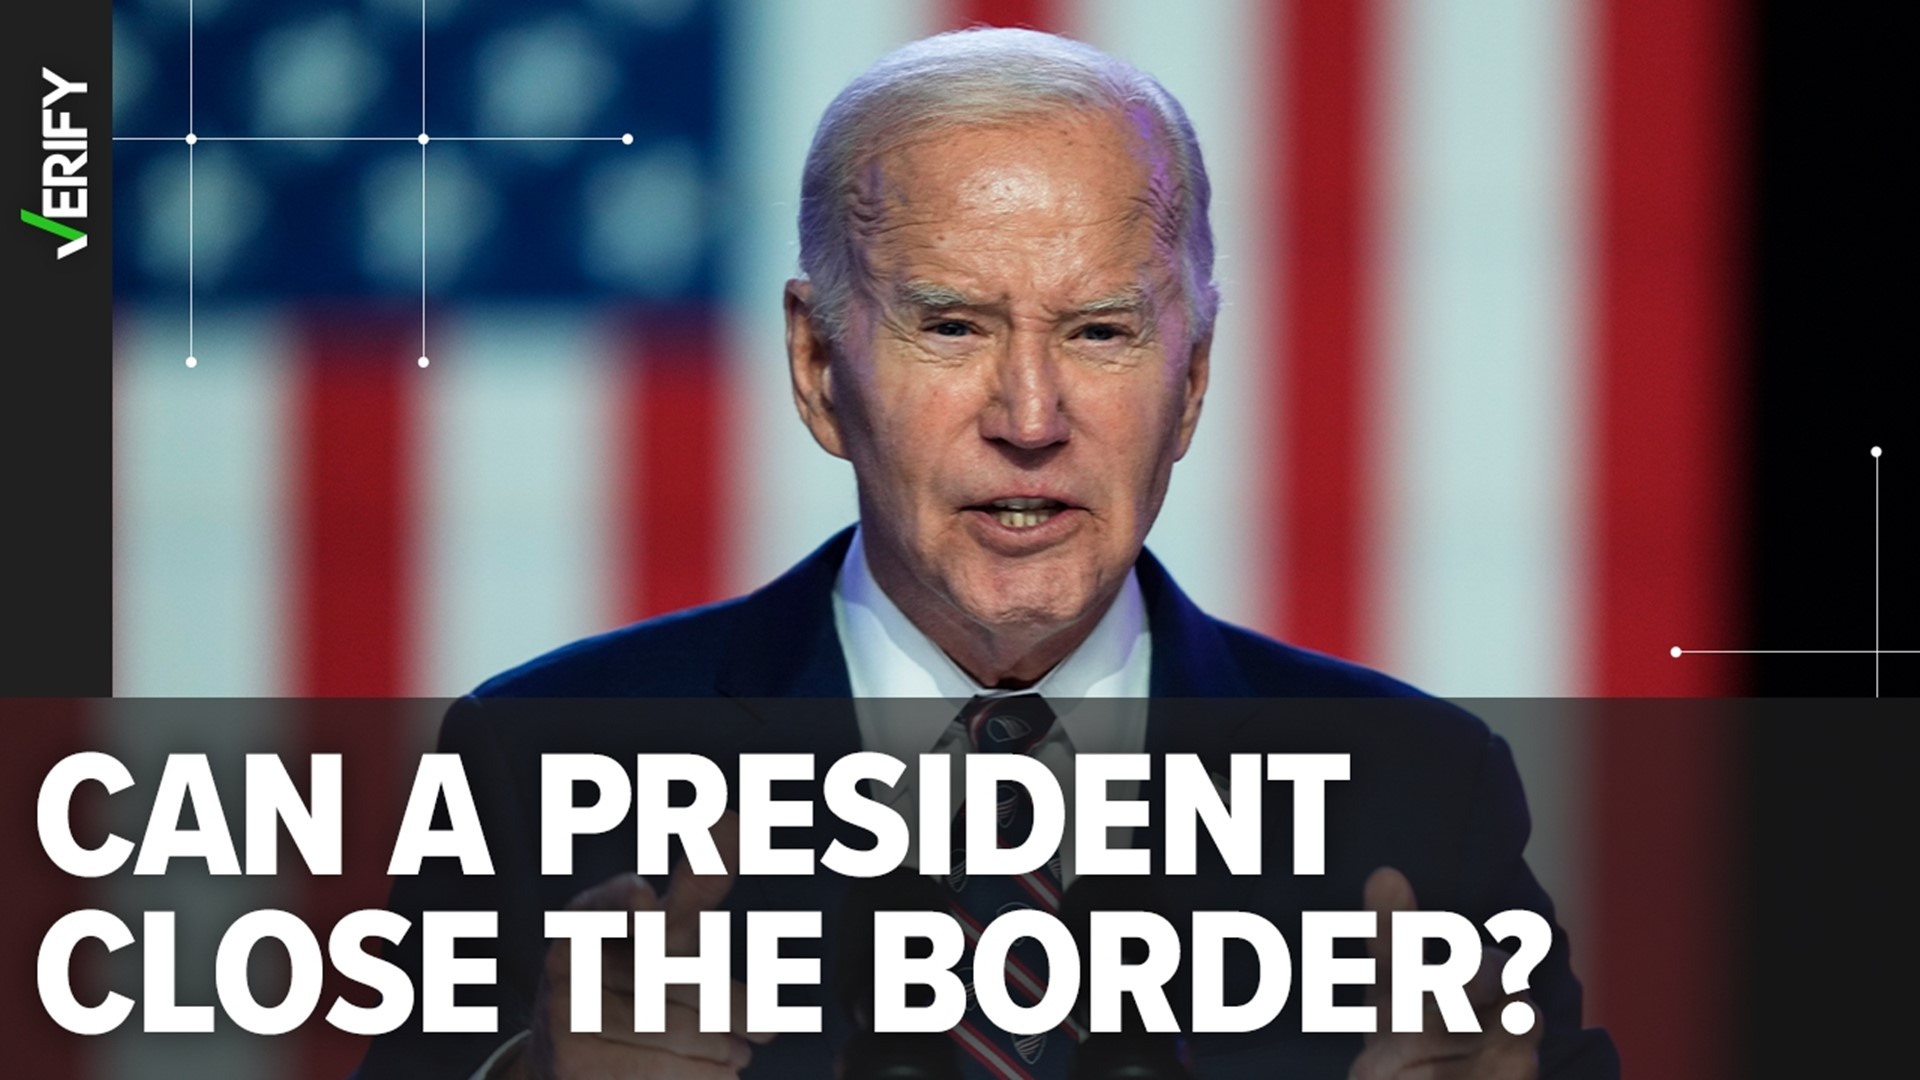 Trump and other U.S. lawmakers claim Biden could close the border with an executive order. But experts say the president can’t shut down the border to everyone.